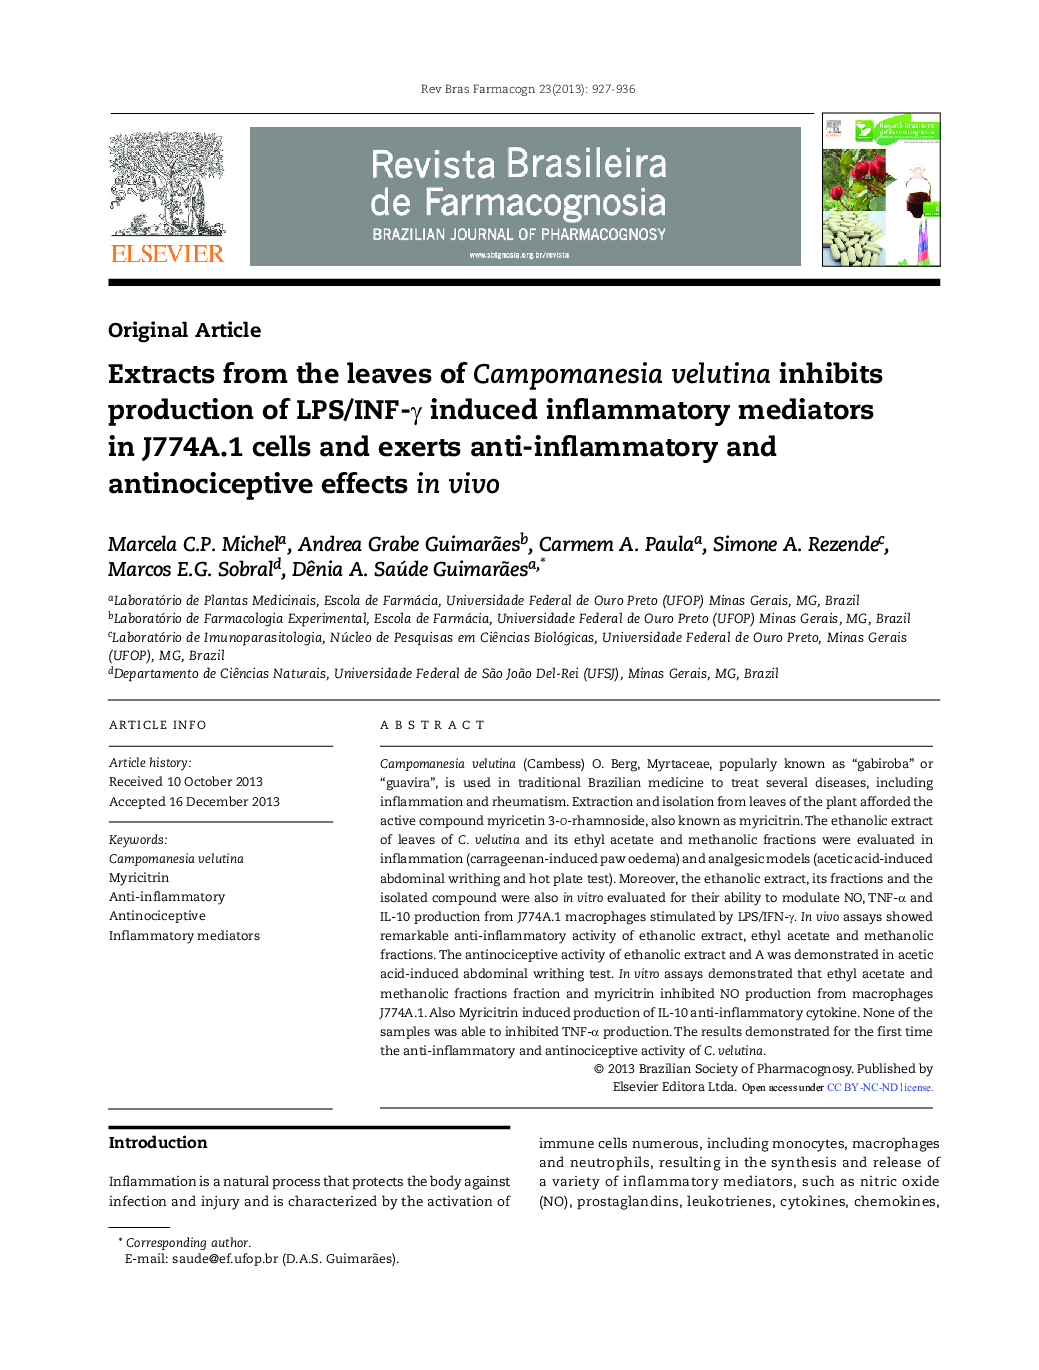 Extracts from the leaves of Campomanesia velutina inhibits production of LPS/INF-γ induced inflammatory mediators in J774A.1 cells and exerts anti-inflammatory and antinociceptive effects in vivo